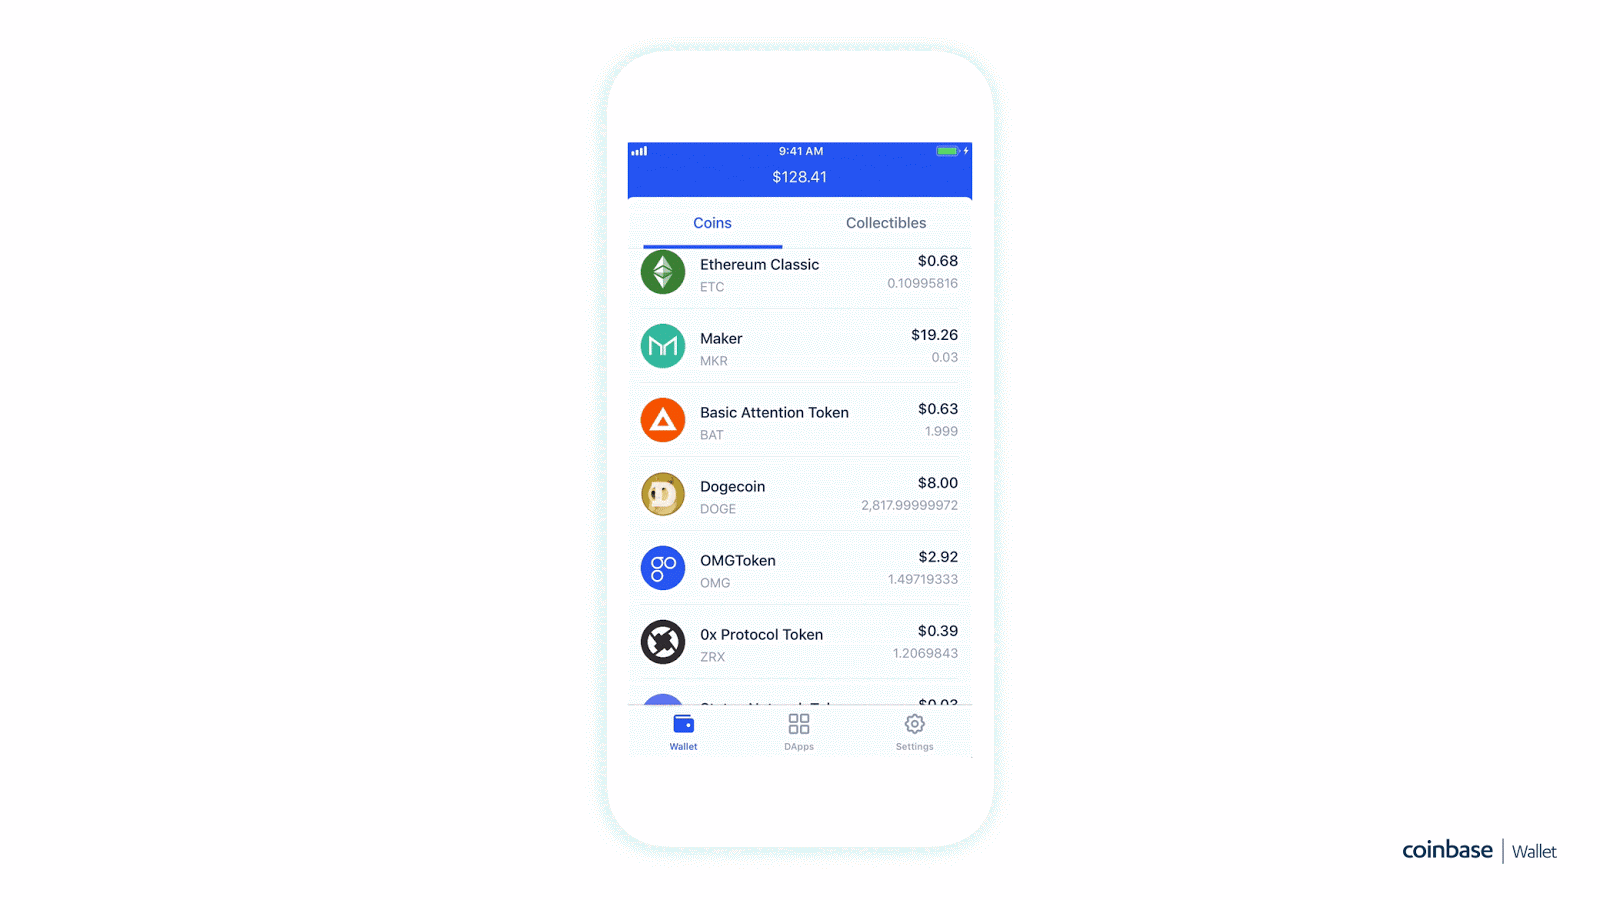 Announcing Dogecoin (DOGE) Support on Coinbase Wallet